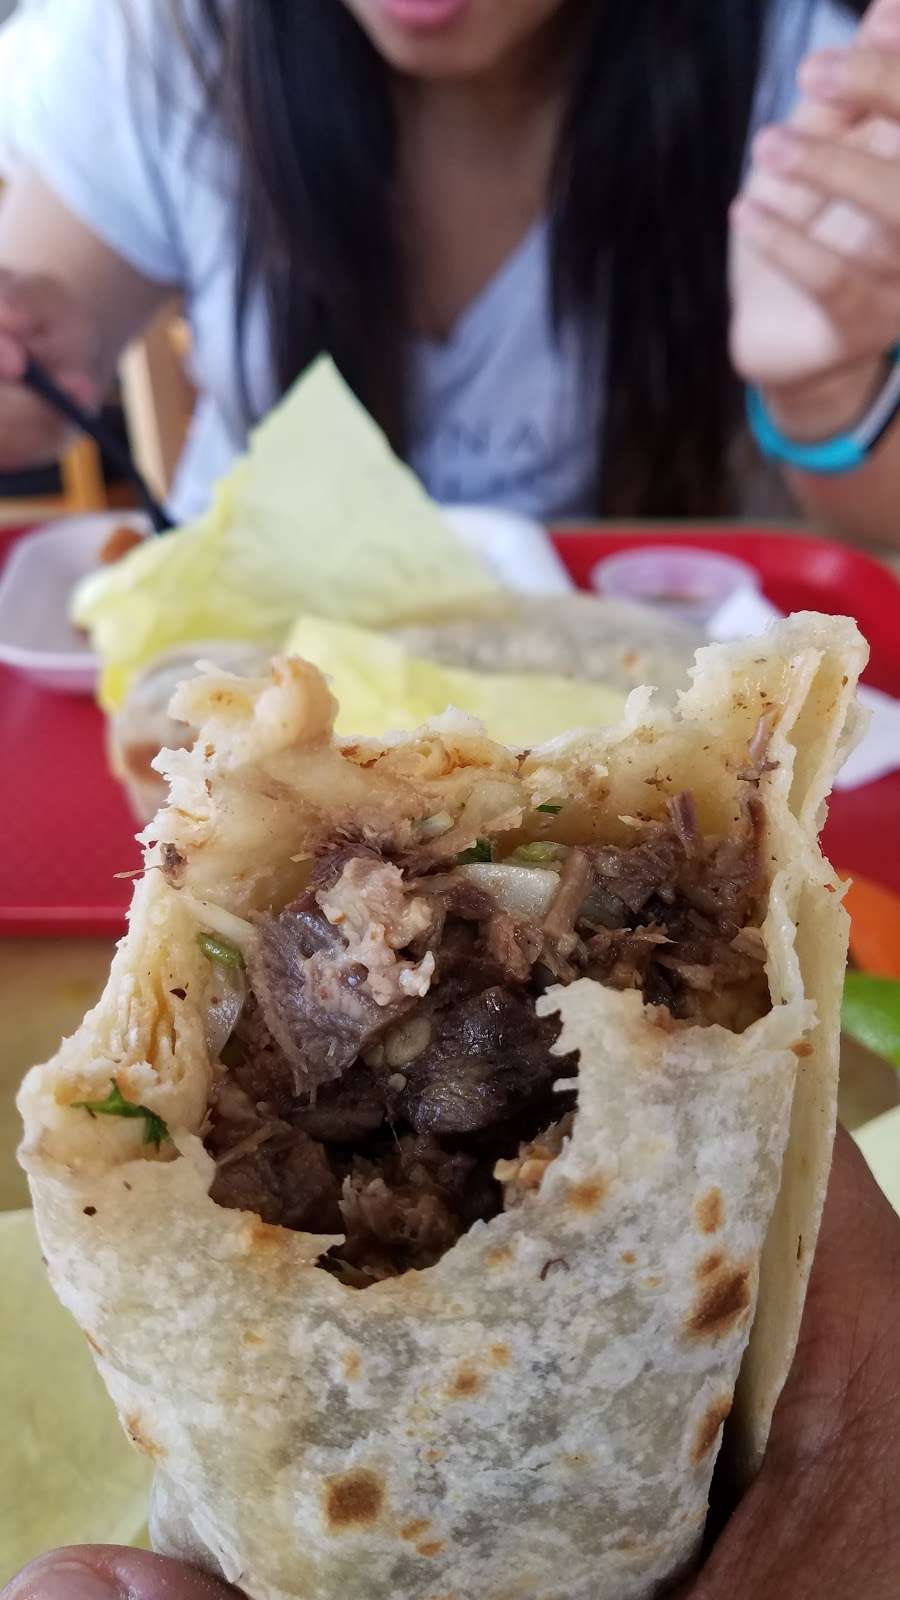 Victorias Mexican Food | 495 College Blvd # C, Oceanside, CA 92057, USA | Phone: (760) 414-1104